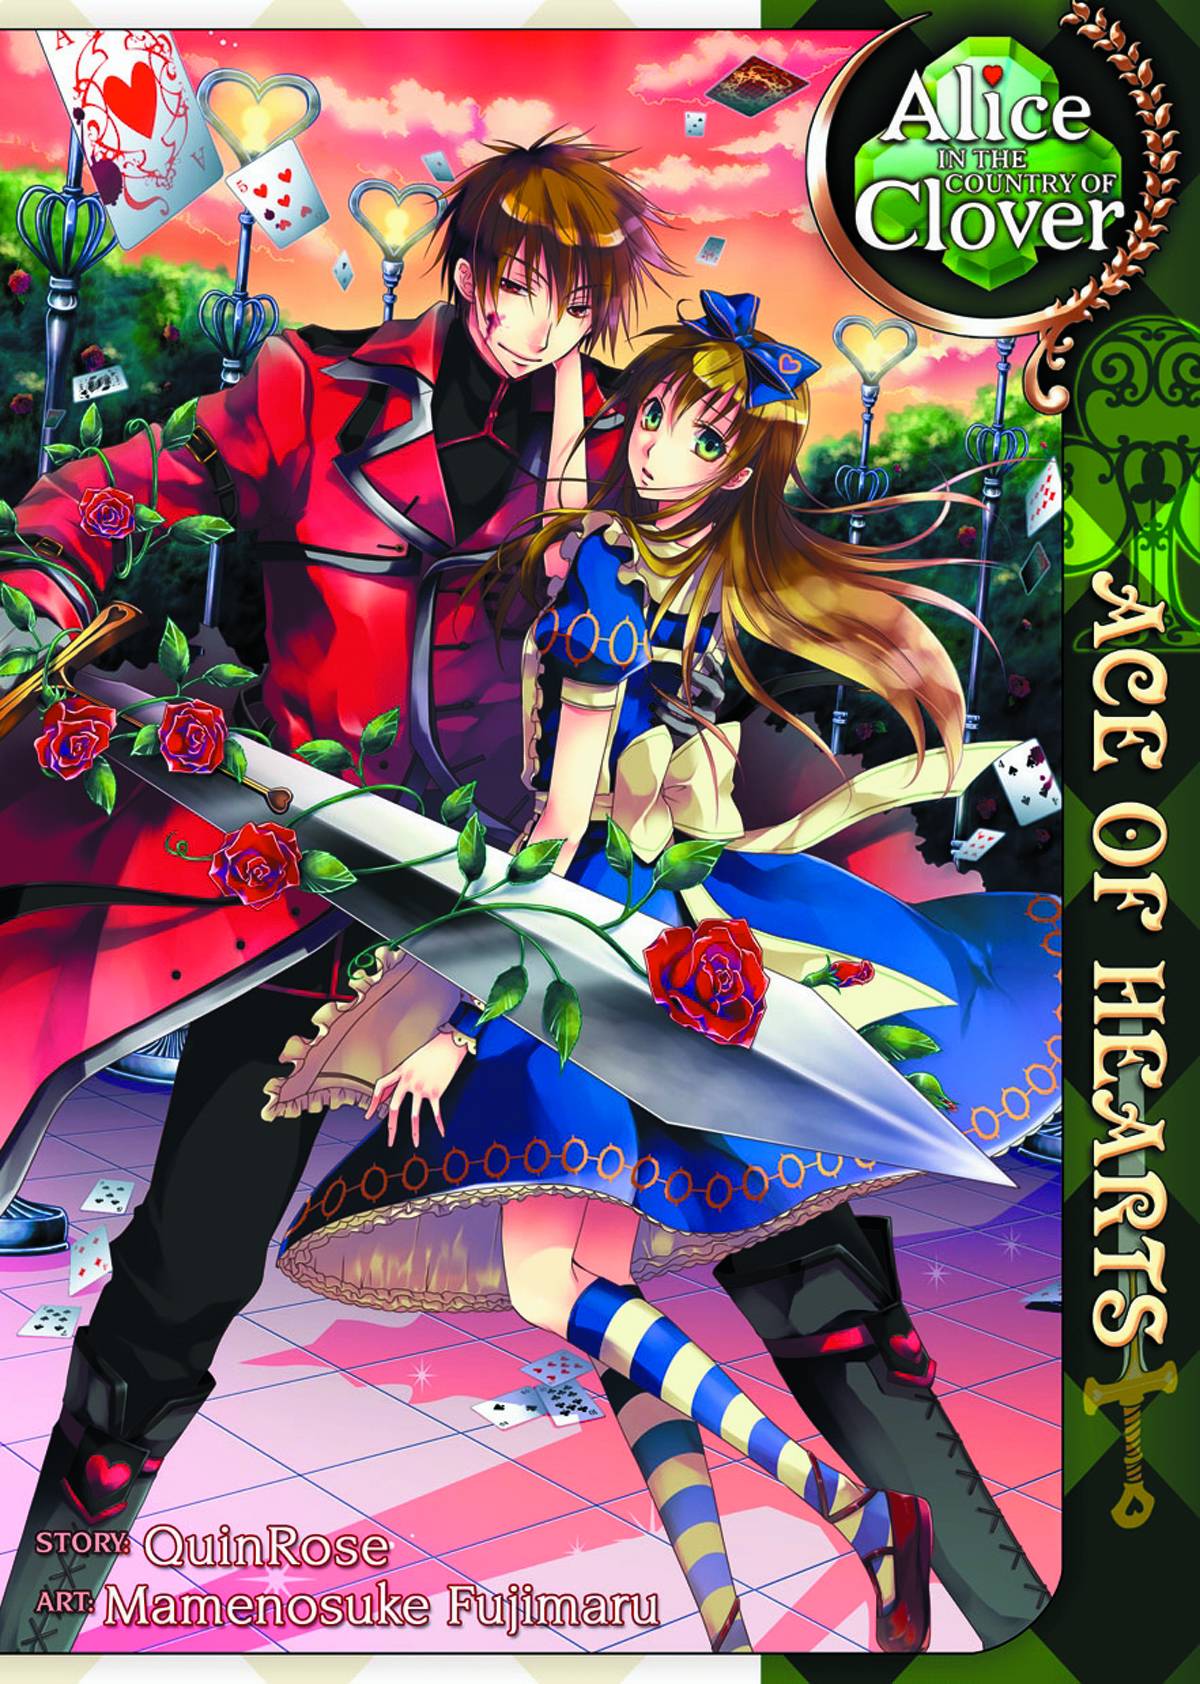 Alice in the Country of Clover Ace of Hearts Manga Volume 1